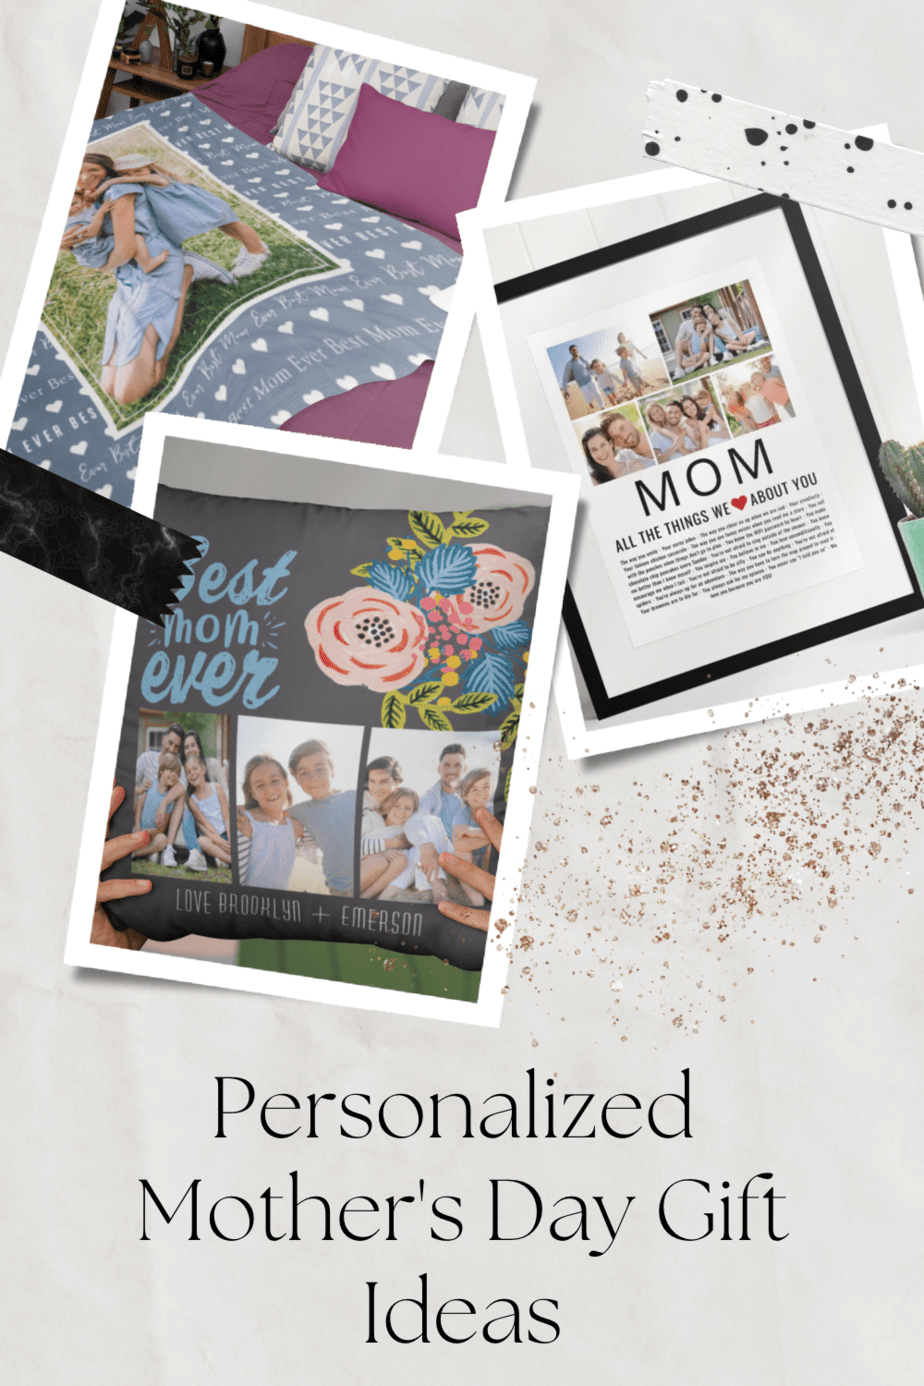 18 Gifts for Mom • Personalized Mother’s Day Gifts to Show Your Love